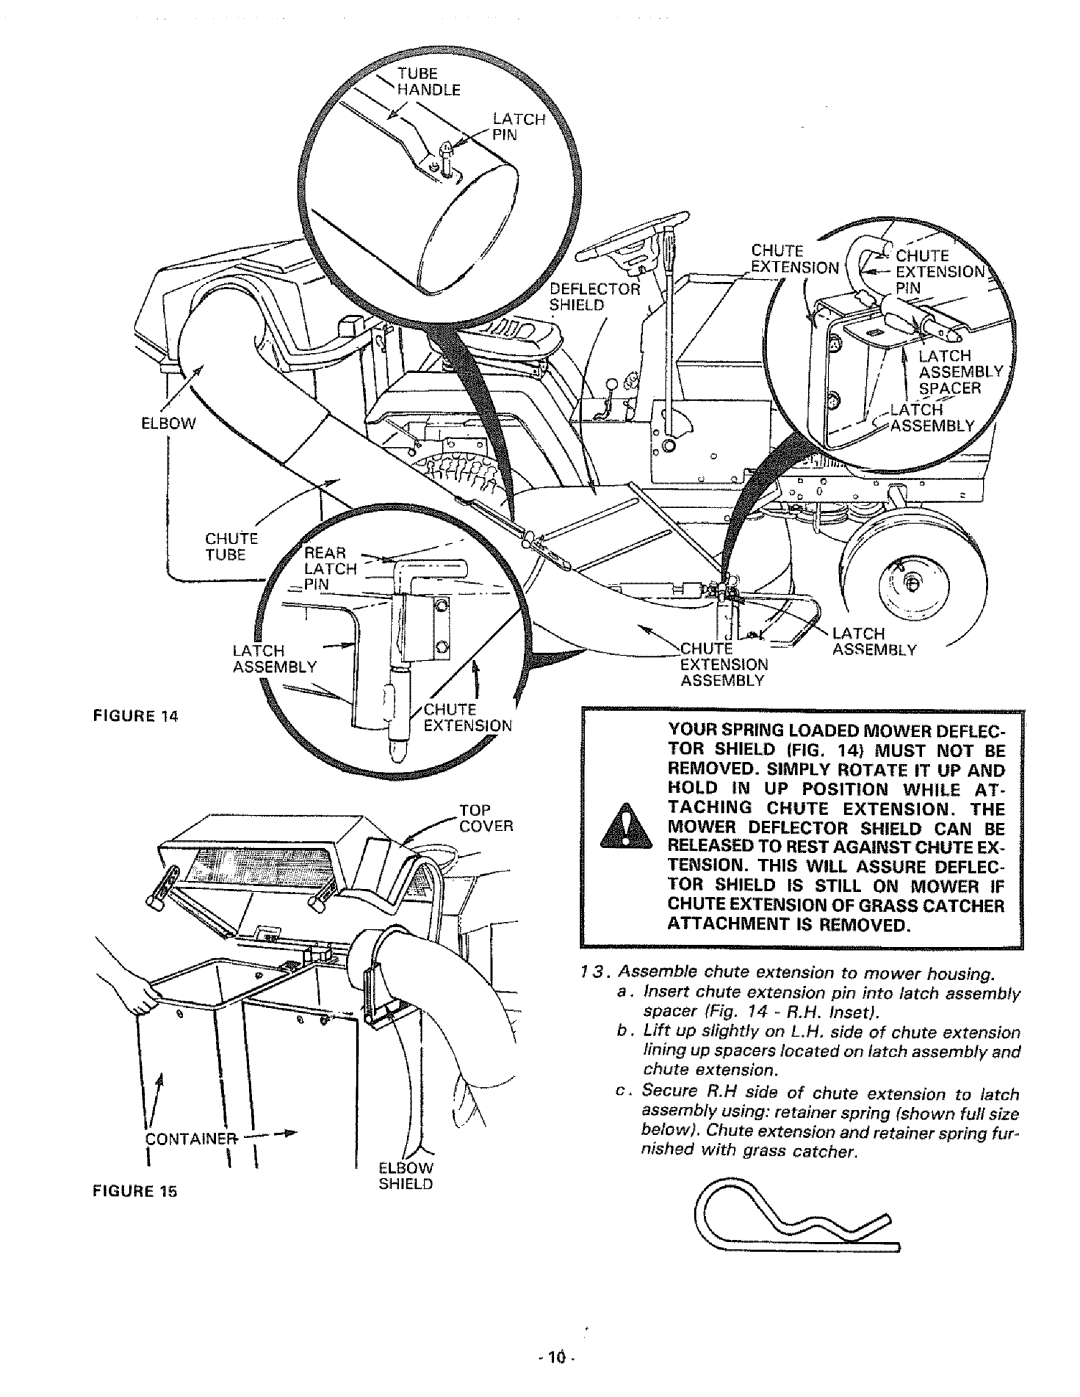 Sears 917.249391 manual Andle Elbow, Tube, __PtN, Chute _Chute Extension E Shield Latch Assembly, Spacer _Assembly 